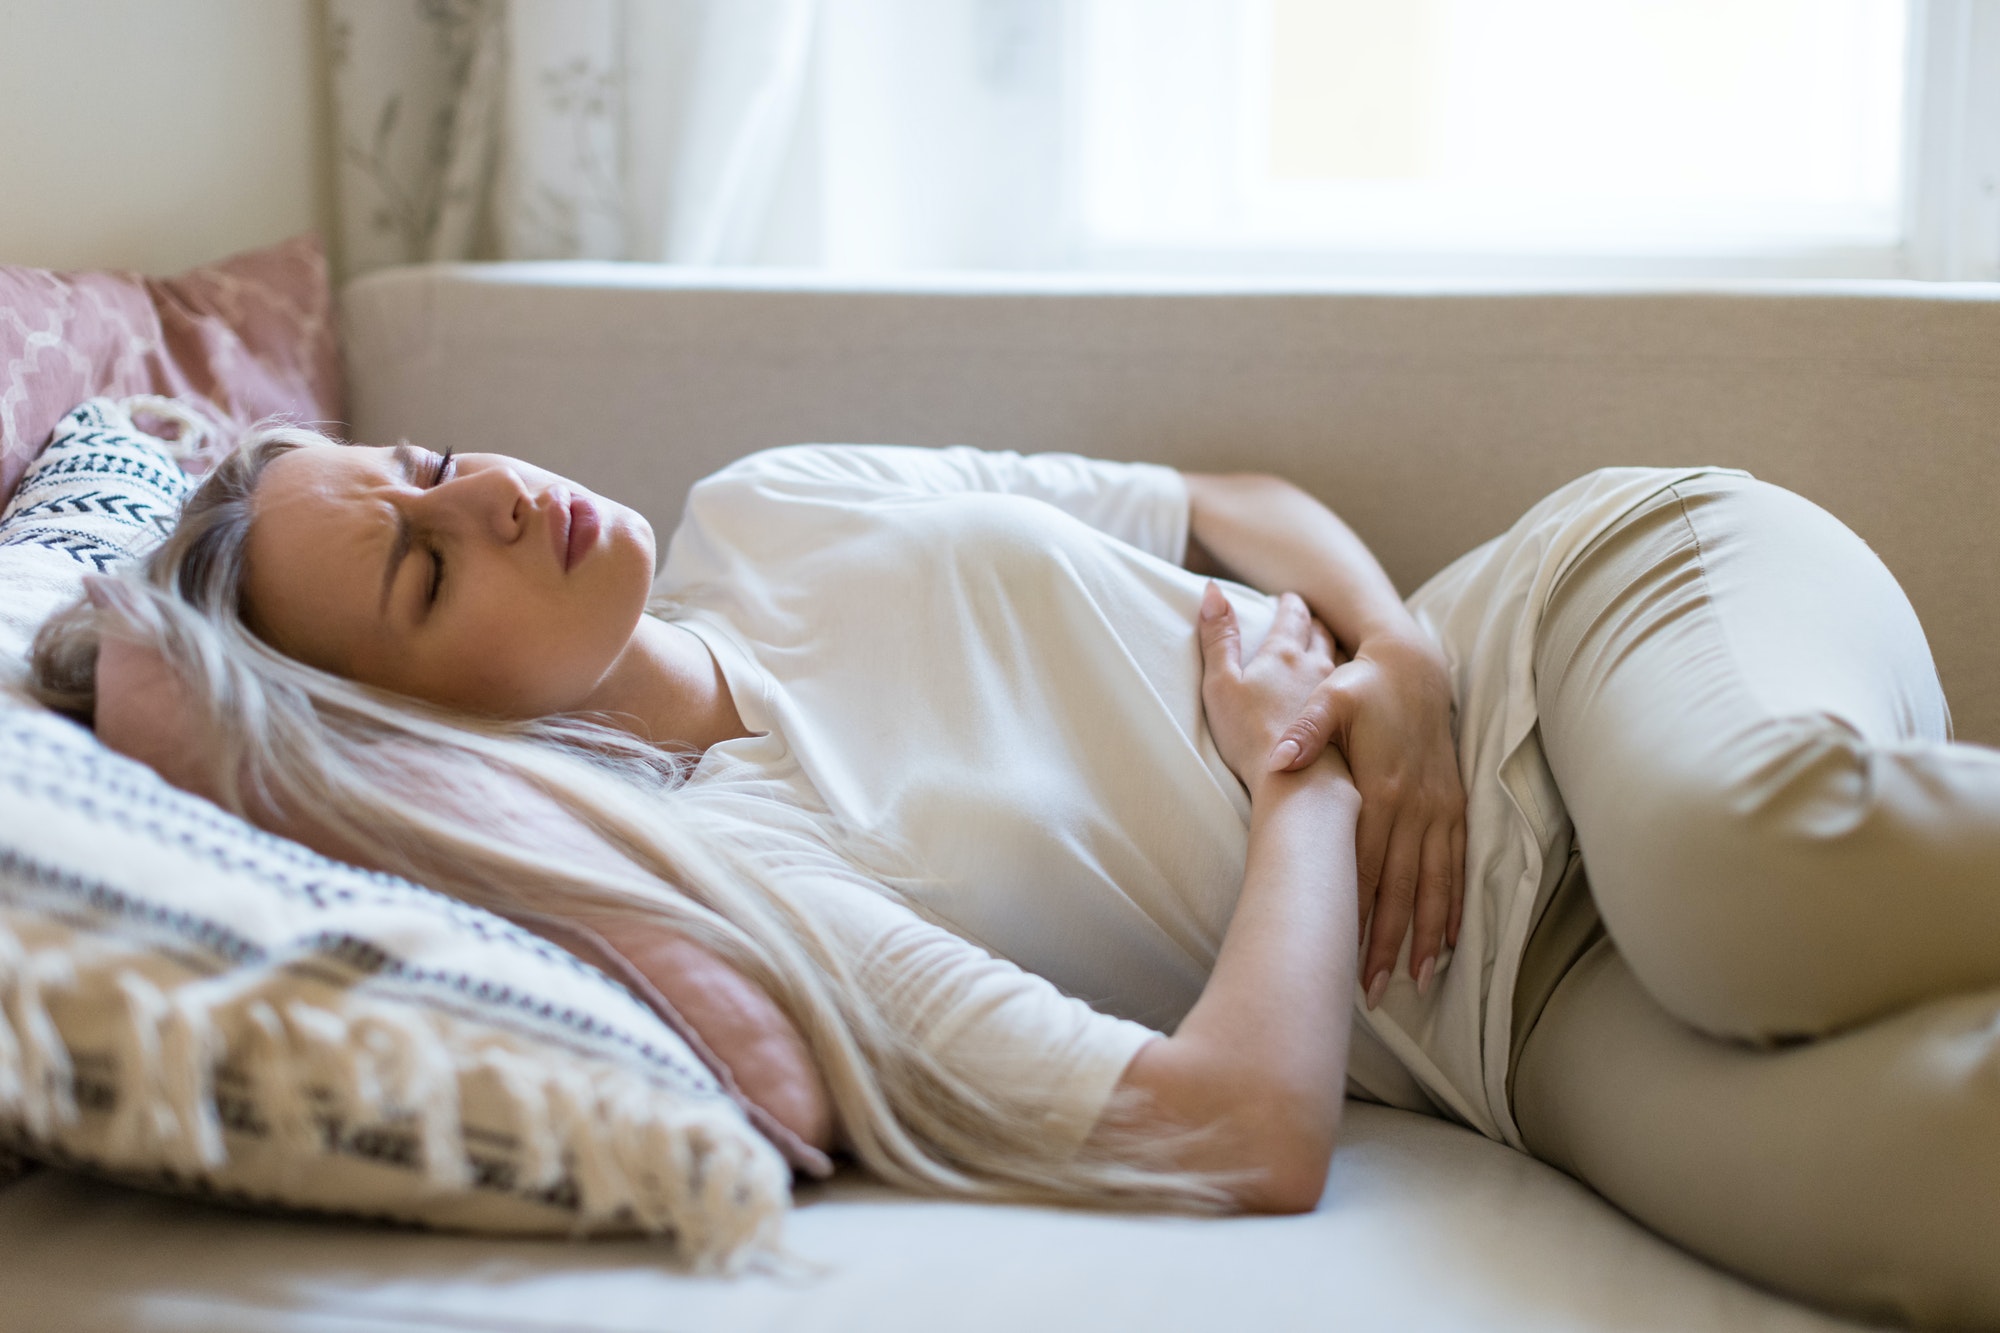 girl suffering from stomach pain feeling abdominal pain or cramps, lying on sofa.Period menstruation